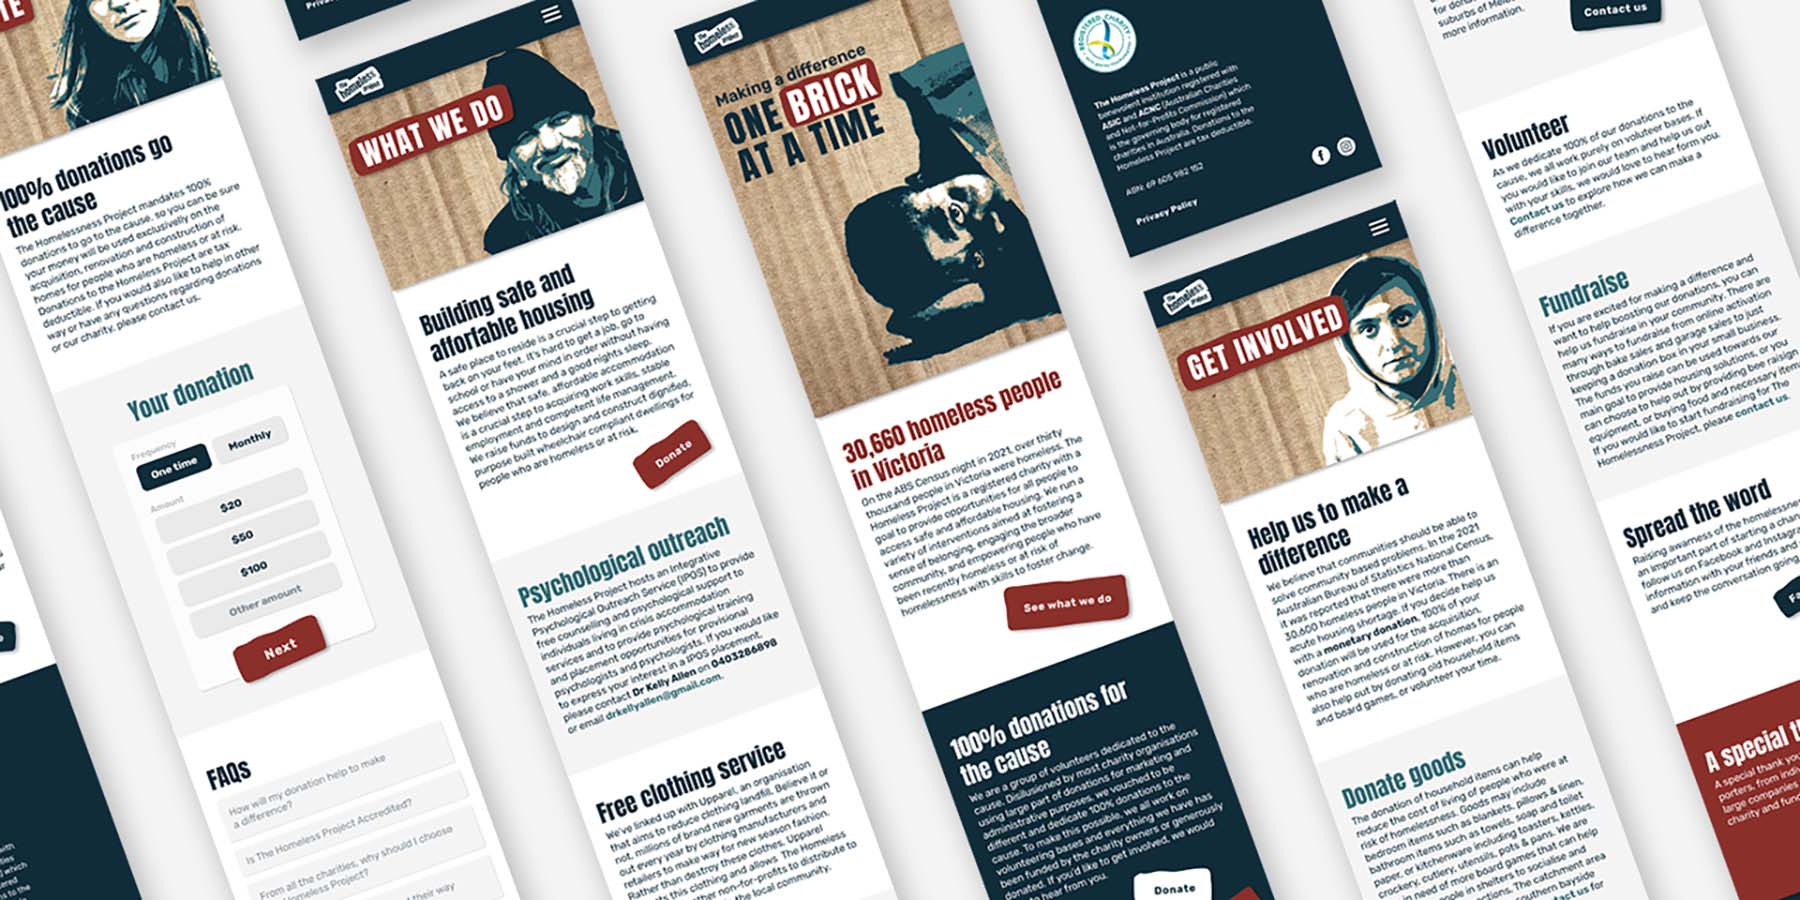 The Homeless Project web design: mobile screens